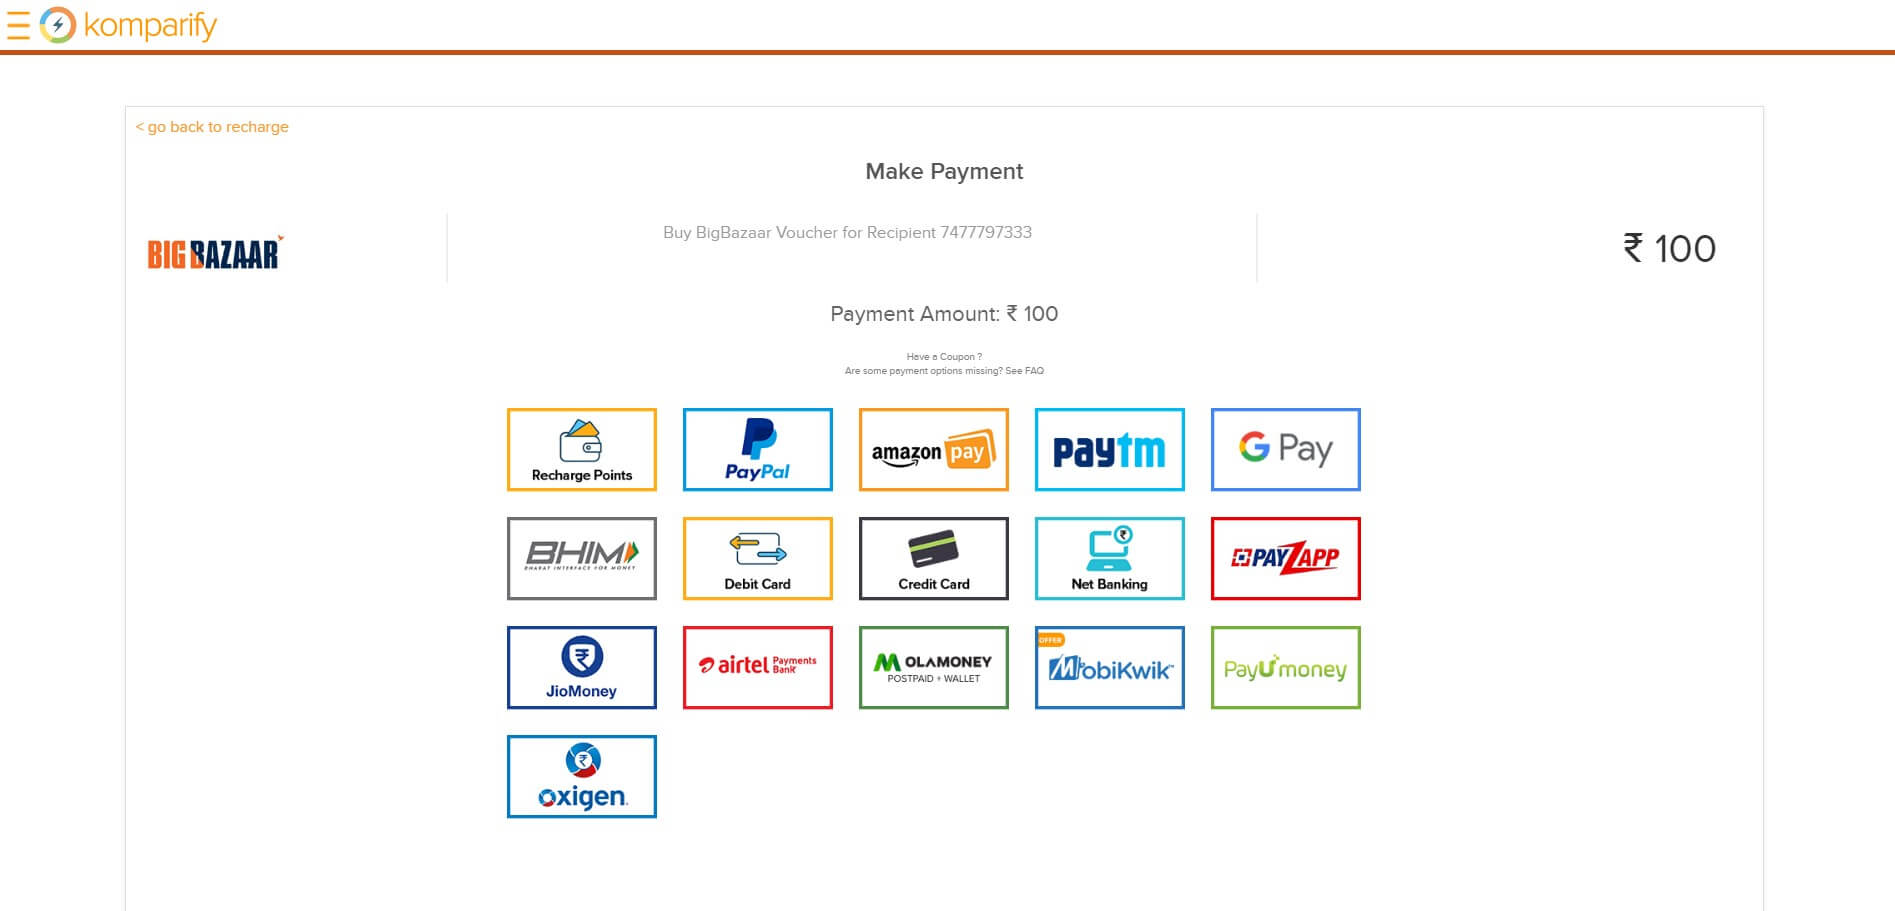 6 Tricks to Transfer Amazon Pay Balance to Bank Account or